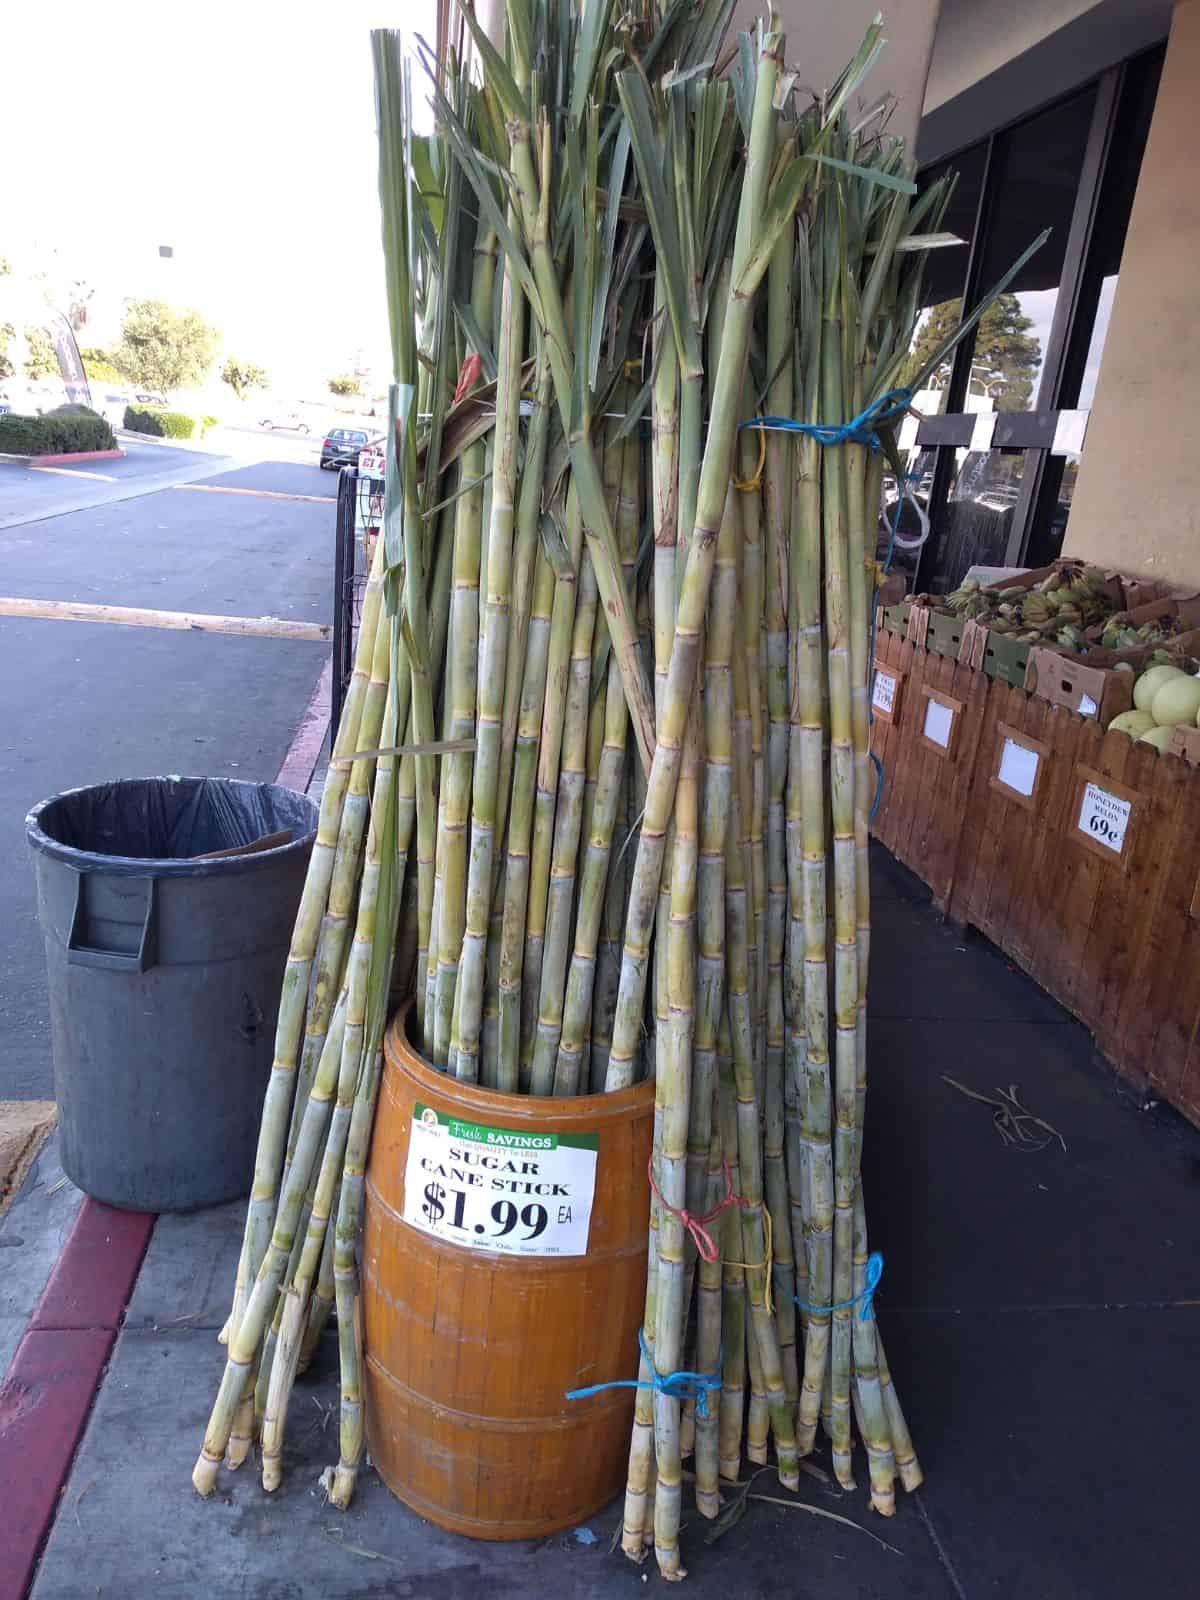 Fresh sugar cane sticks in a barrel outside a grocery store, priced at $1.99 each.